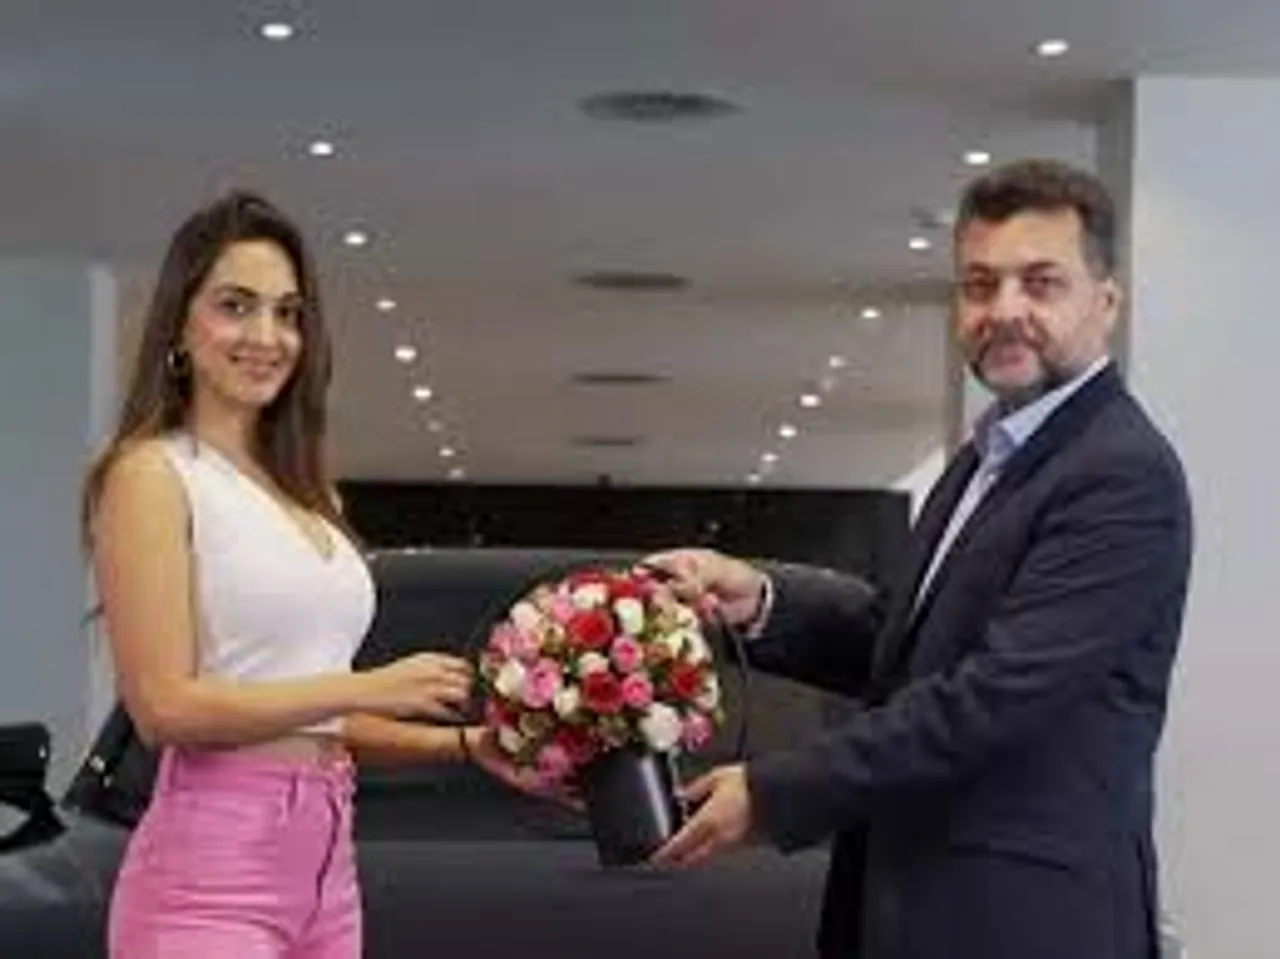 Kiara Advani becomes the first female brand ambassador of Audi , joins Virat Kohli and Rege - Jean page in the league!